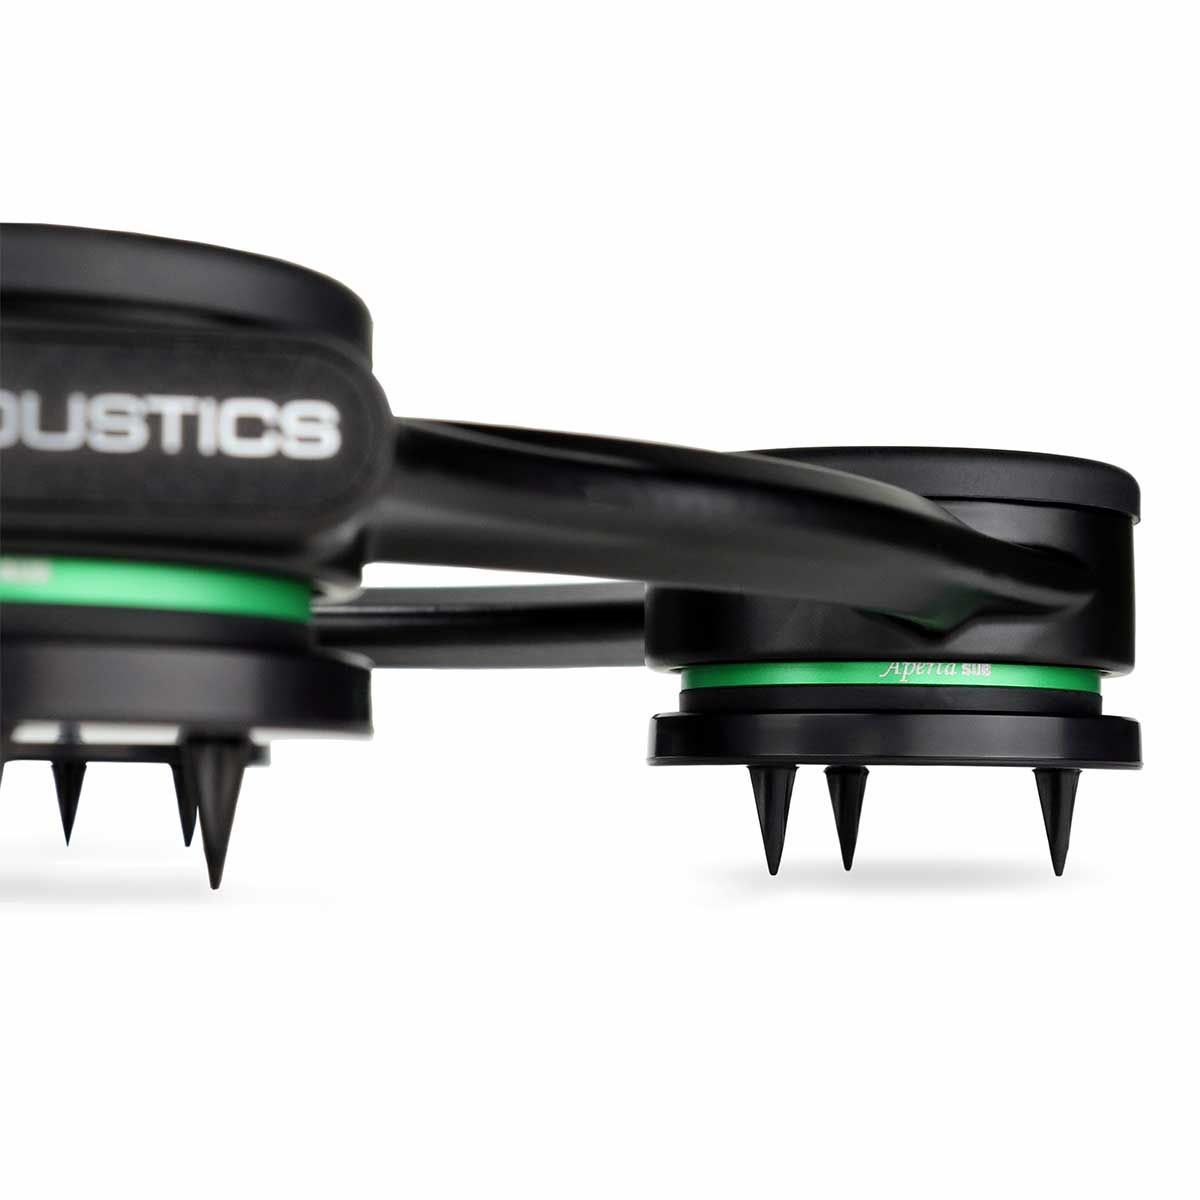 IsoAcoustics Aperta Sub Subwoofer Isolation Stand, side view with carpet spikes